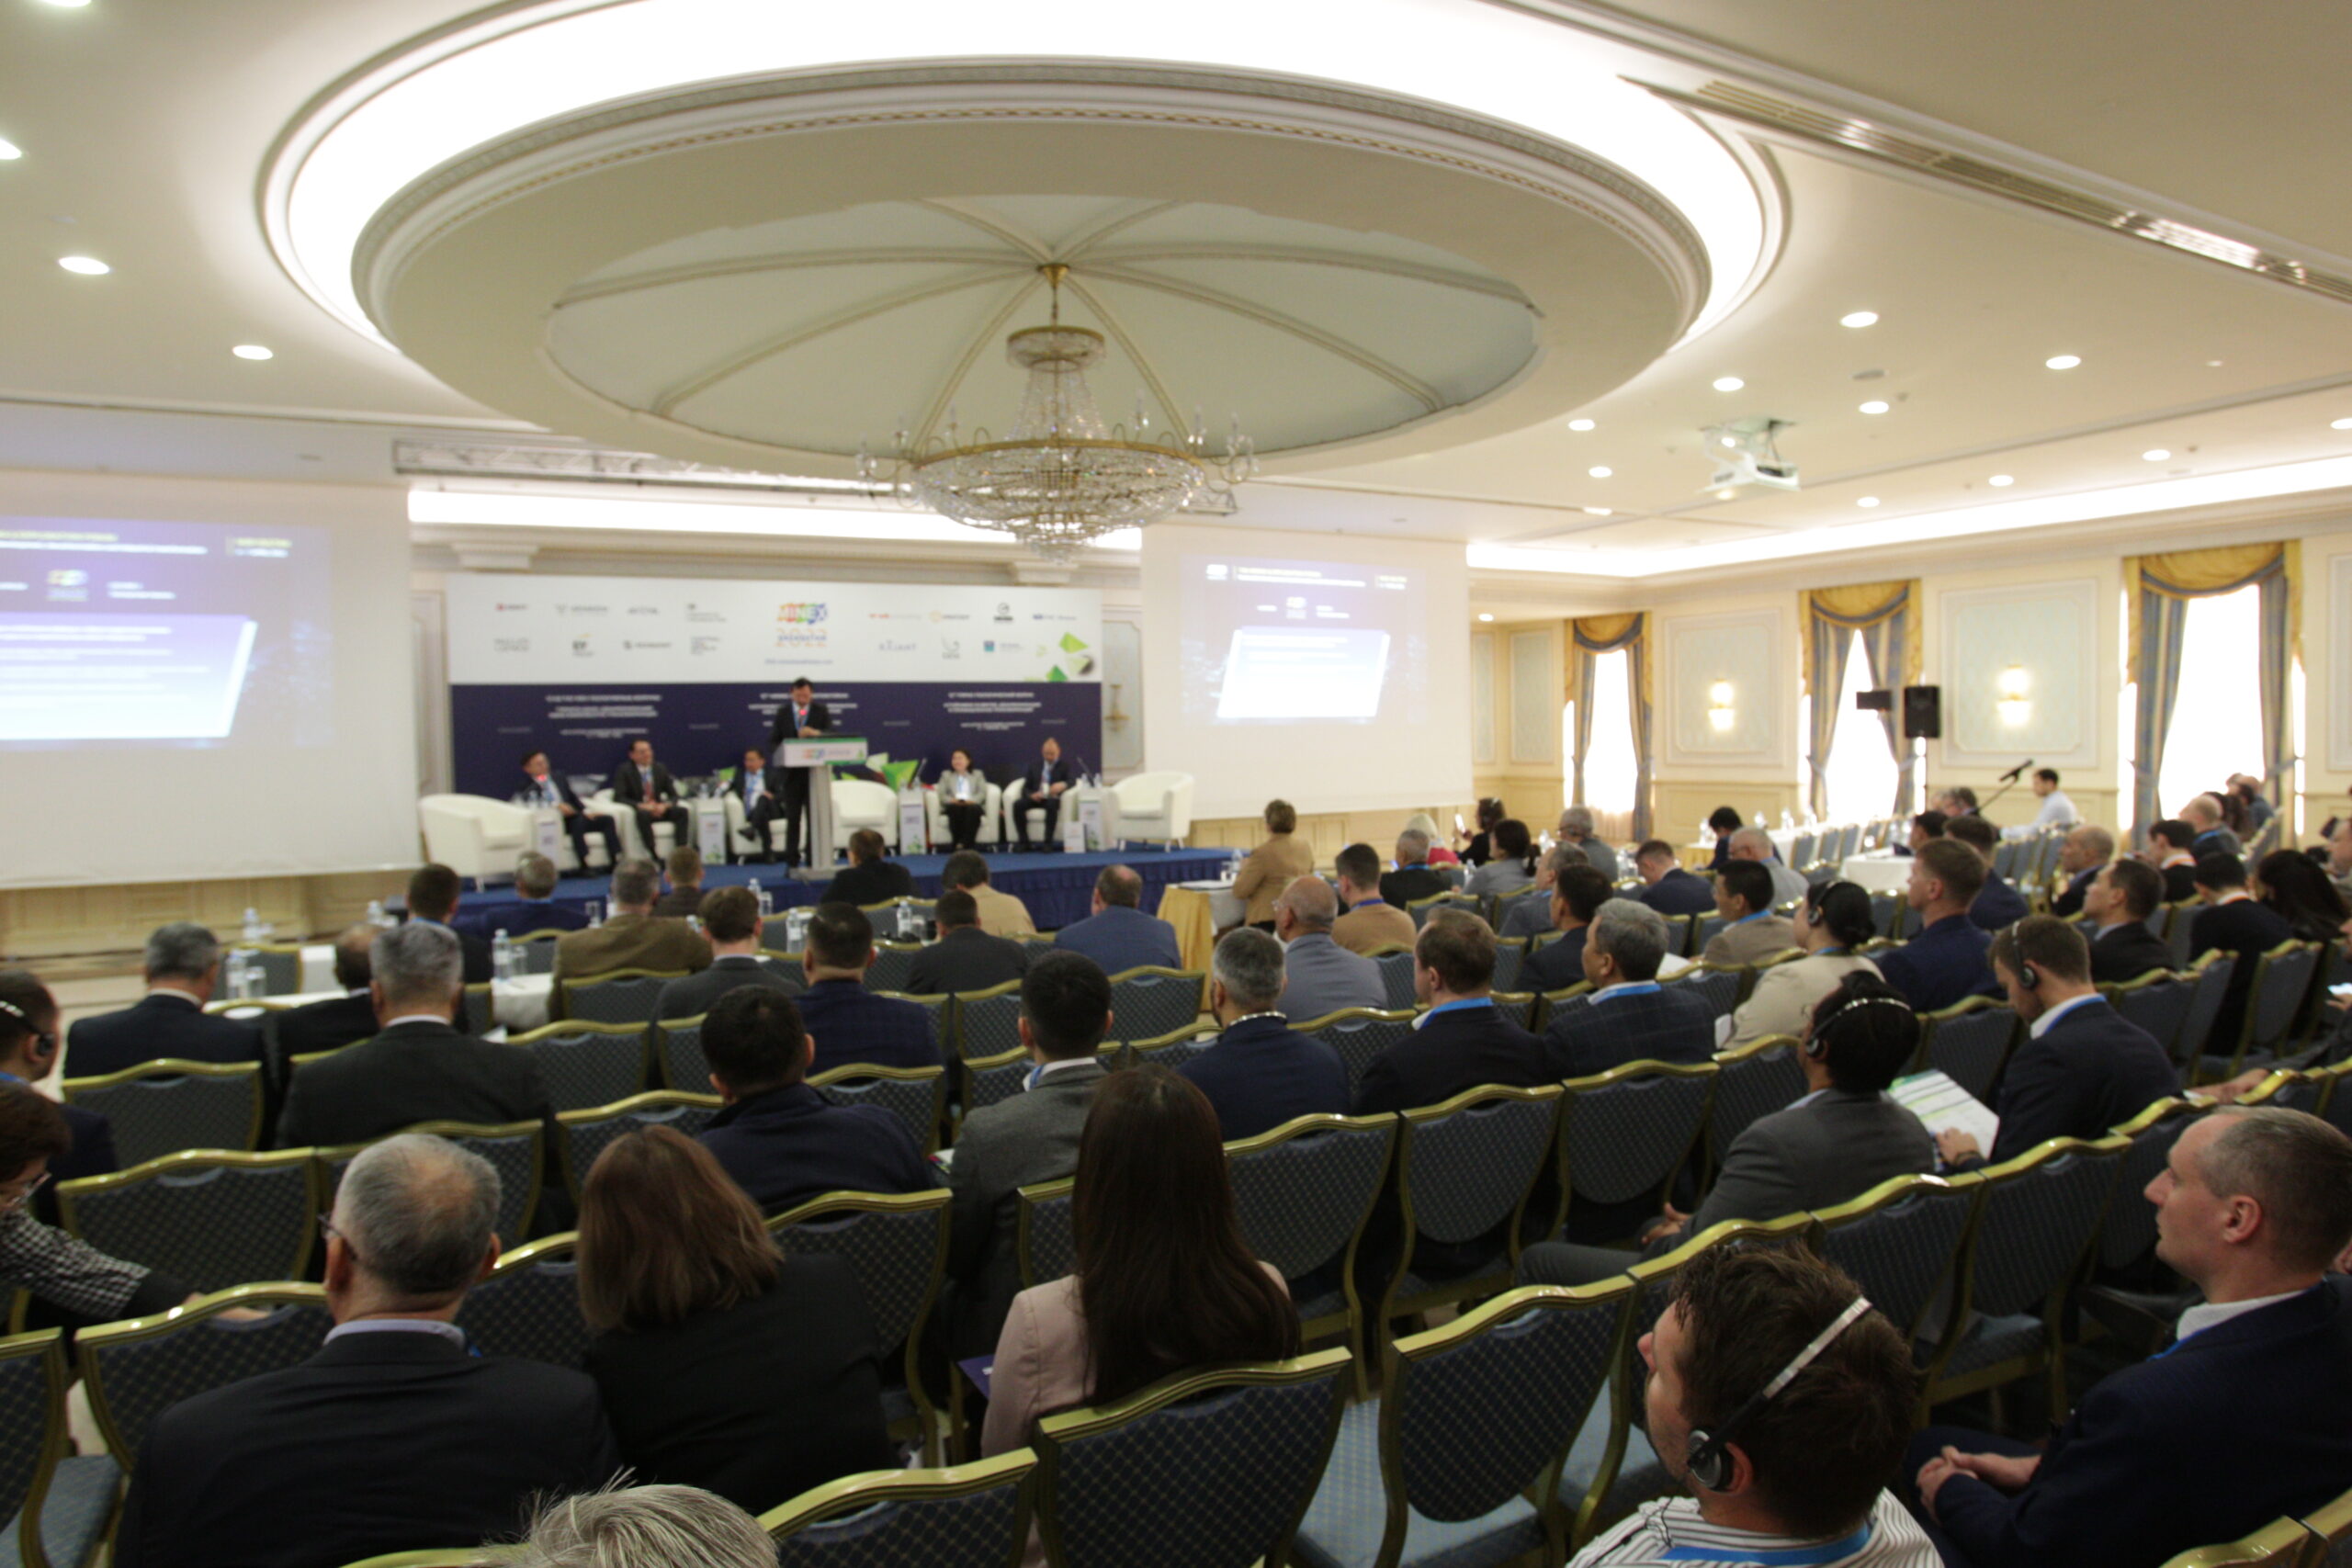 The first day of the 12th International Mining and Geological Forum MINEX Kazakhstan 2022 ended in Nur-Sultan